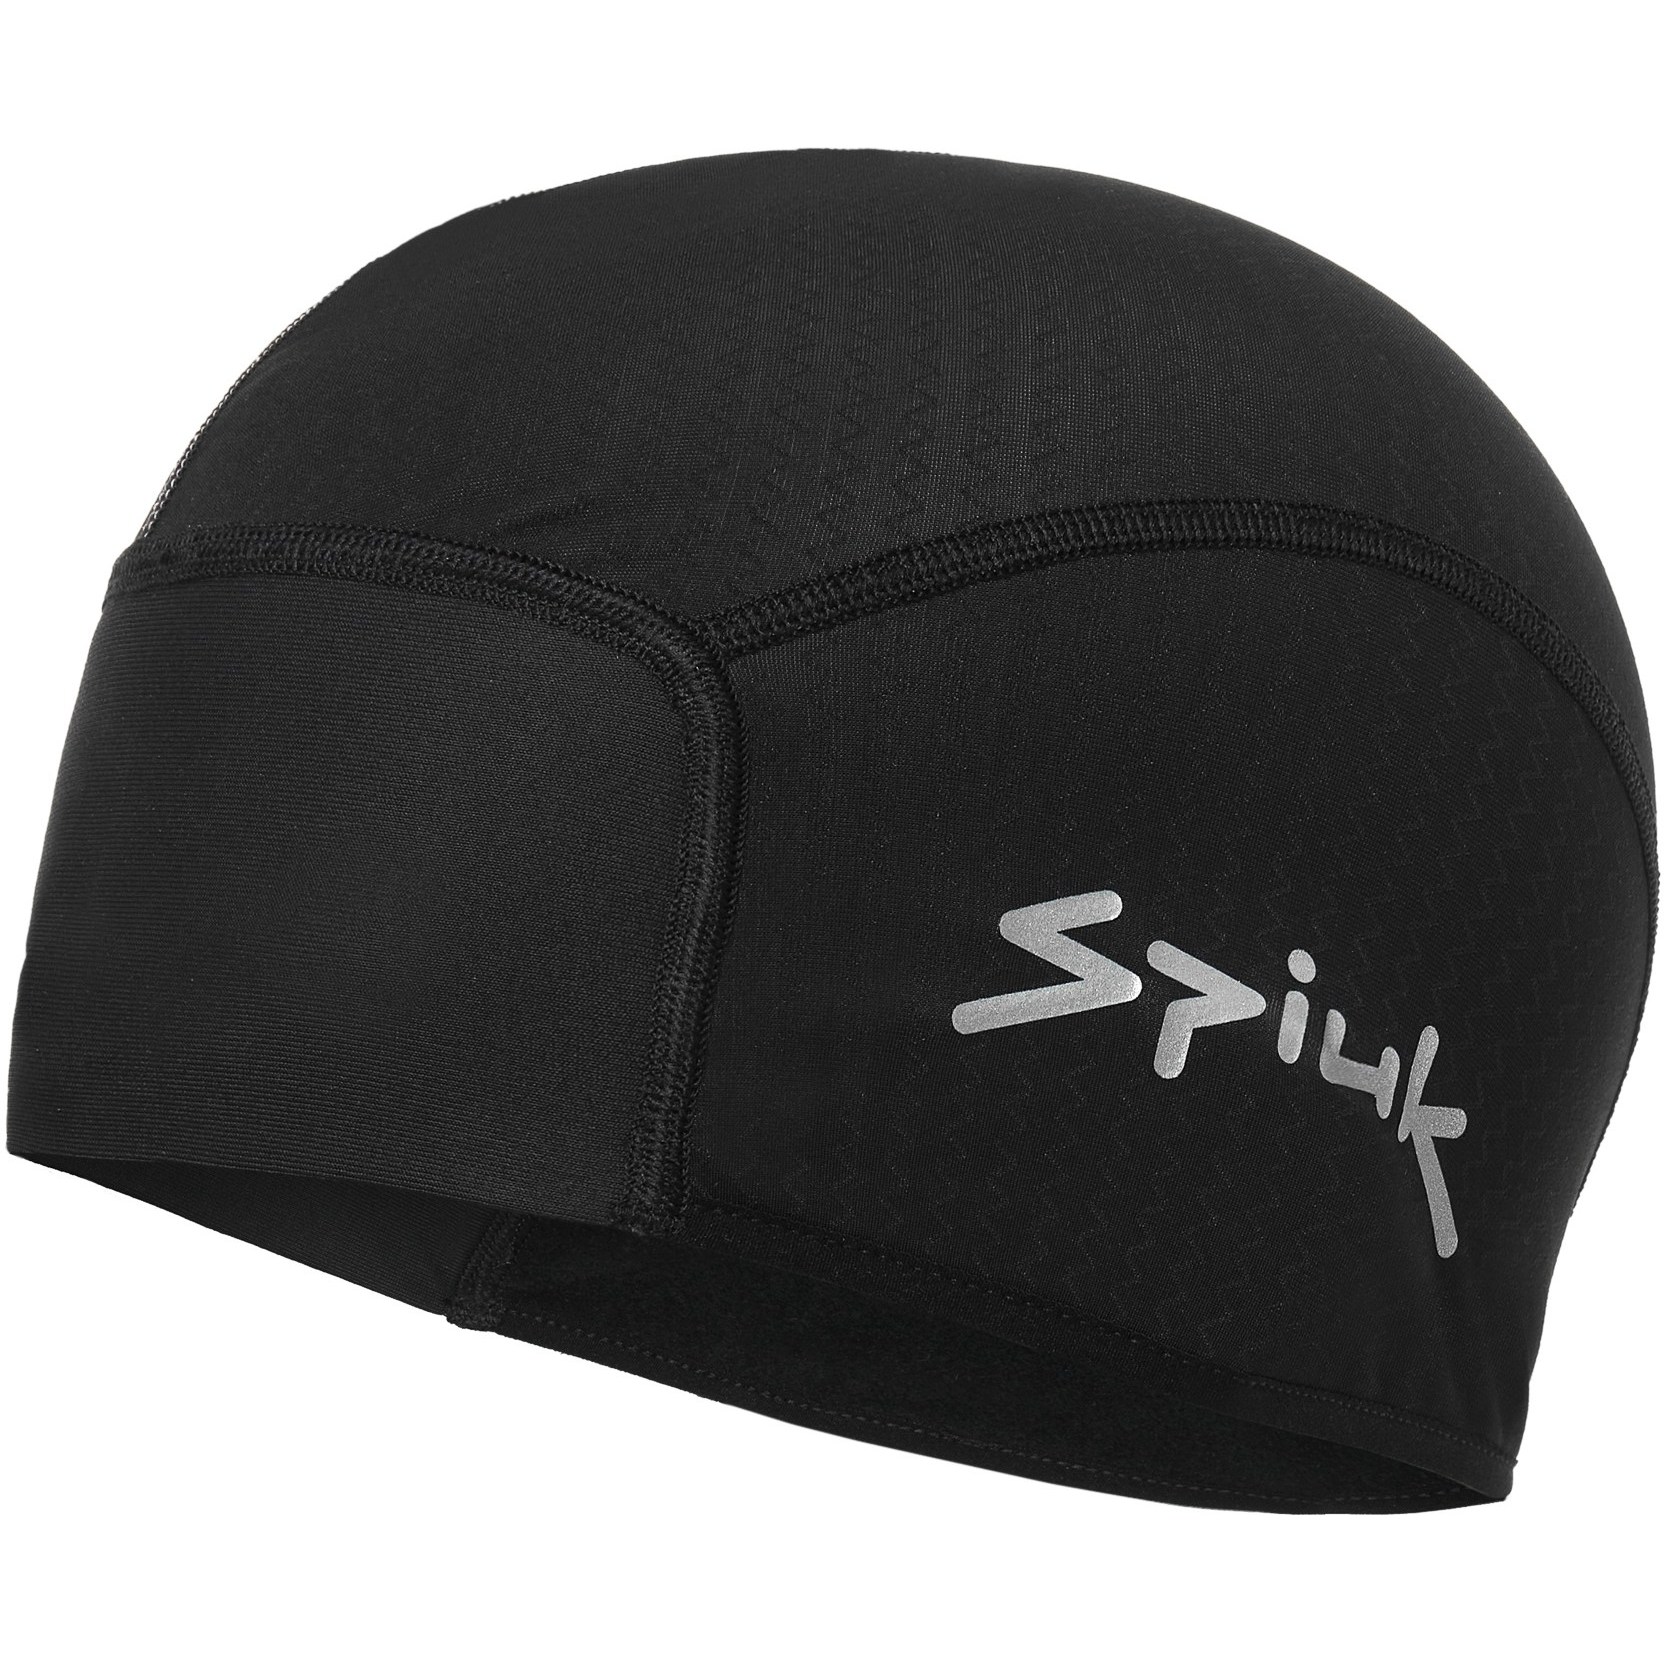 Picture of Spiuk ANATOMIC Cap - black